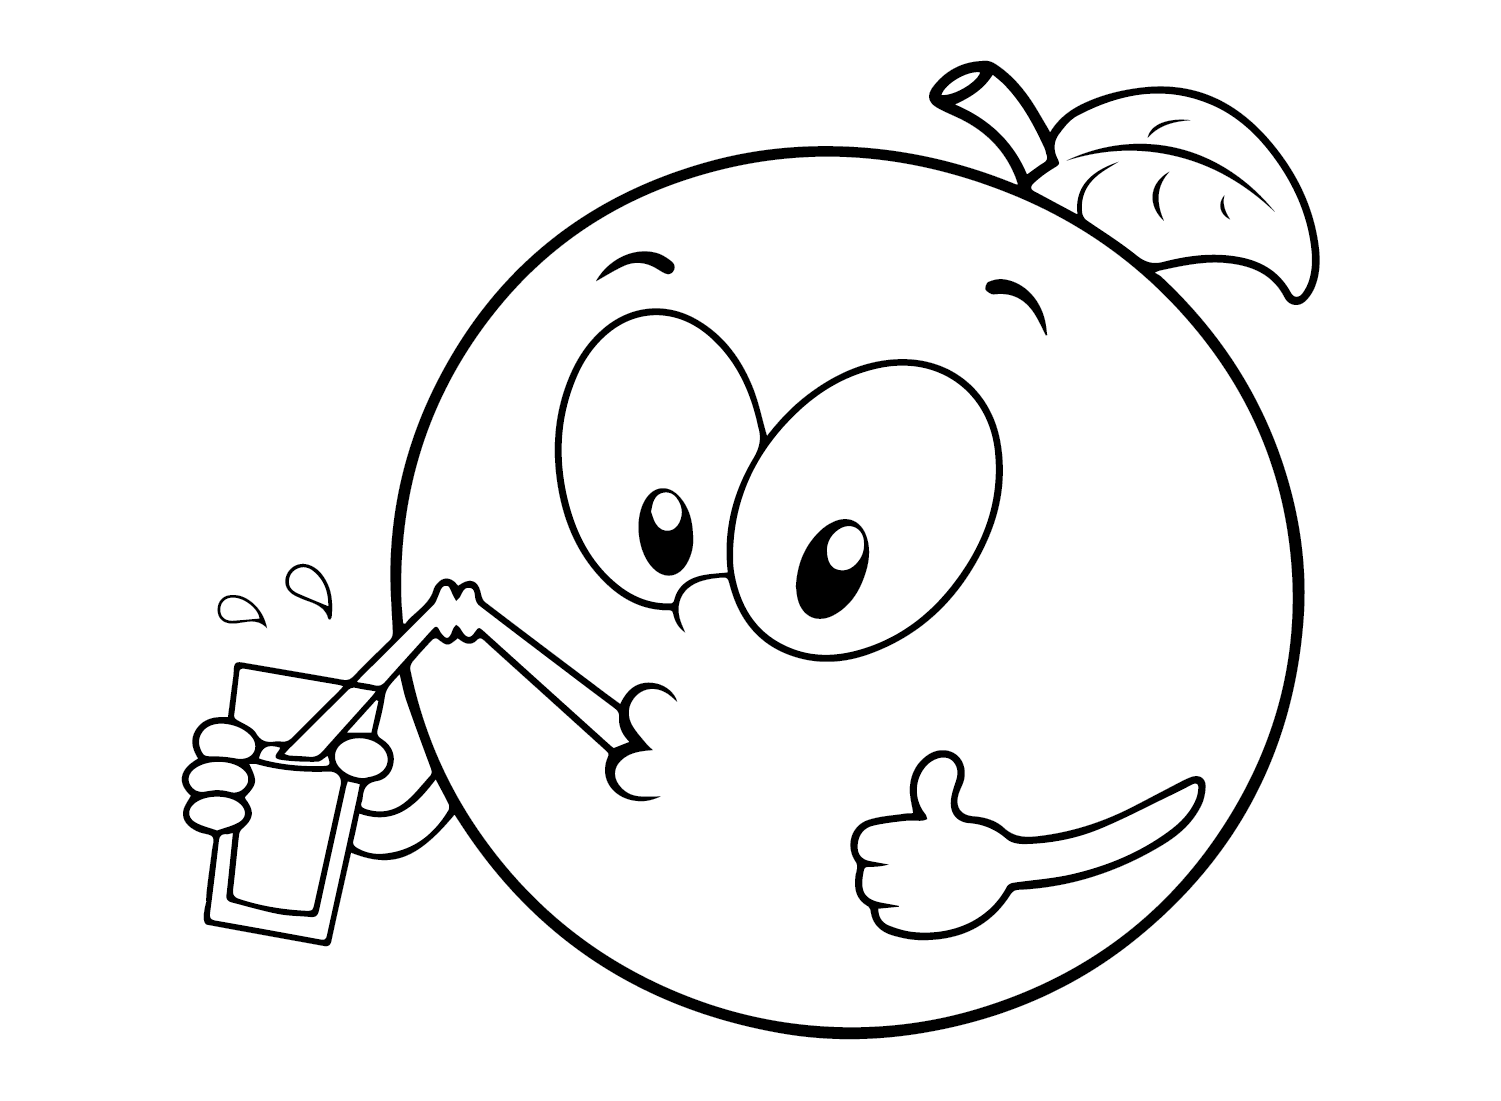 Cartoon Character from Oranges